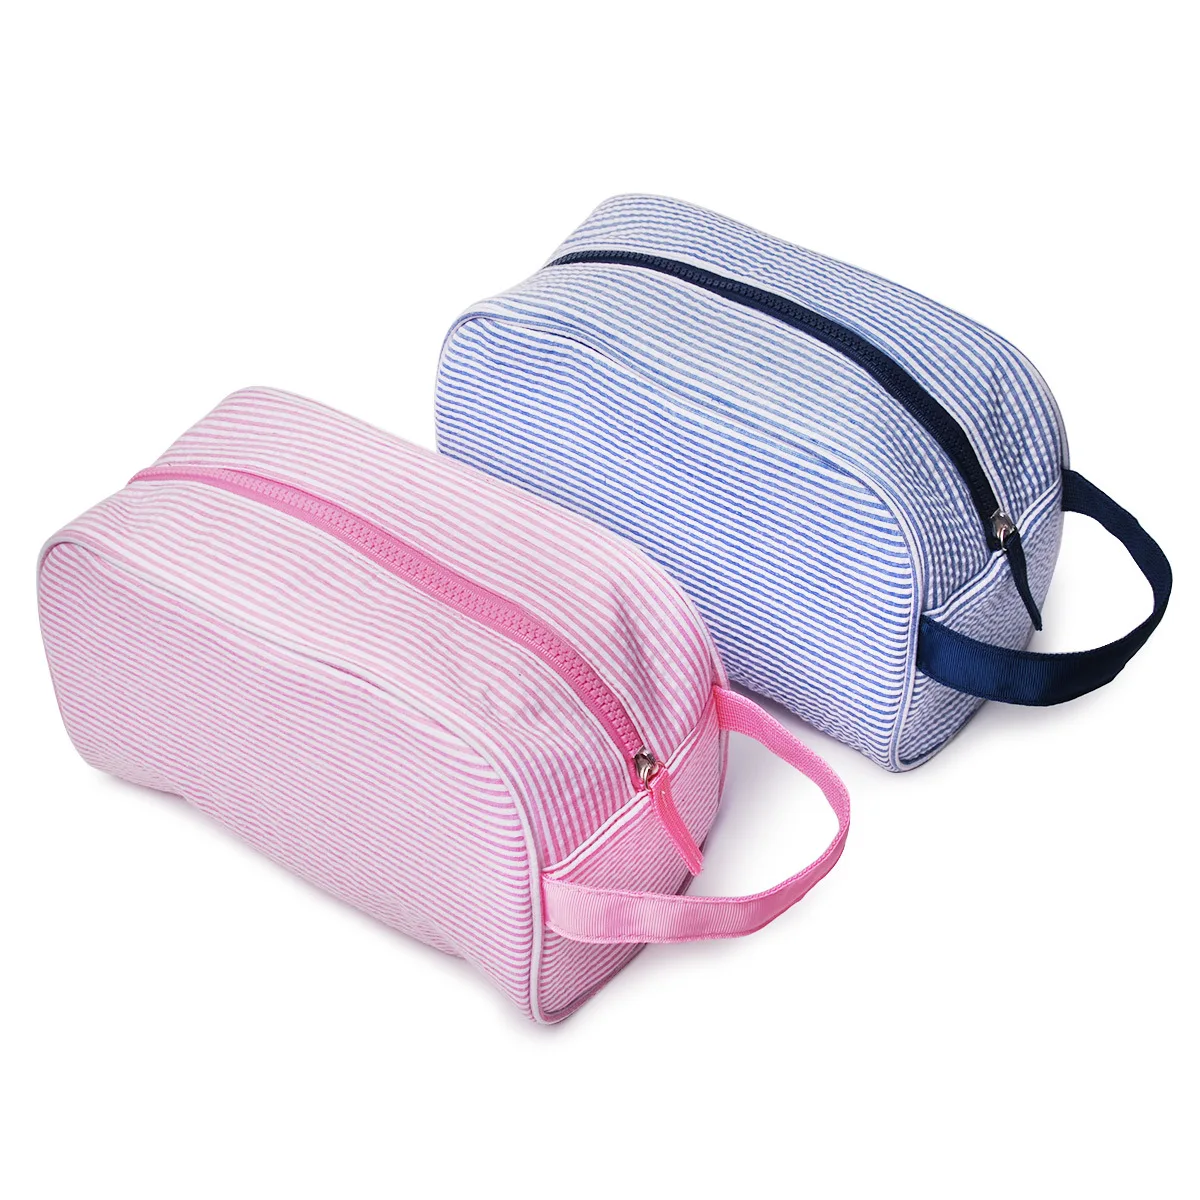 Wholesale Seersucker Cosmetic Bag Striped Storage Make Up Toiletry Pouch   For Women Lady With Zipper Travel Small Organizer Bag